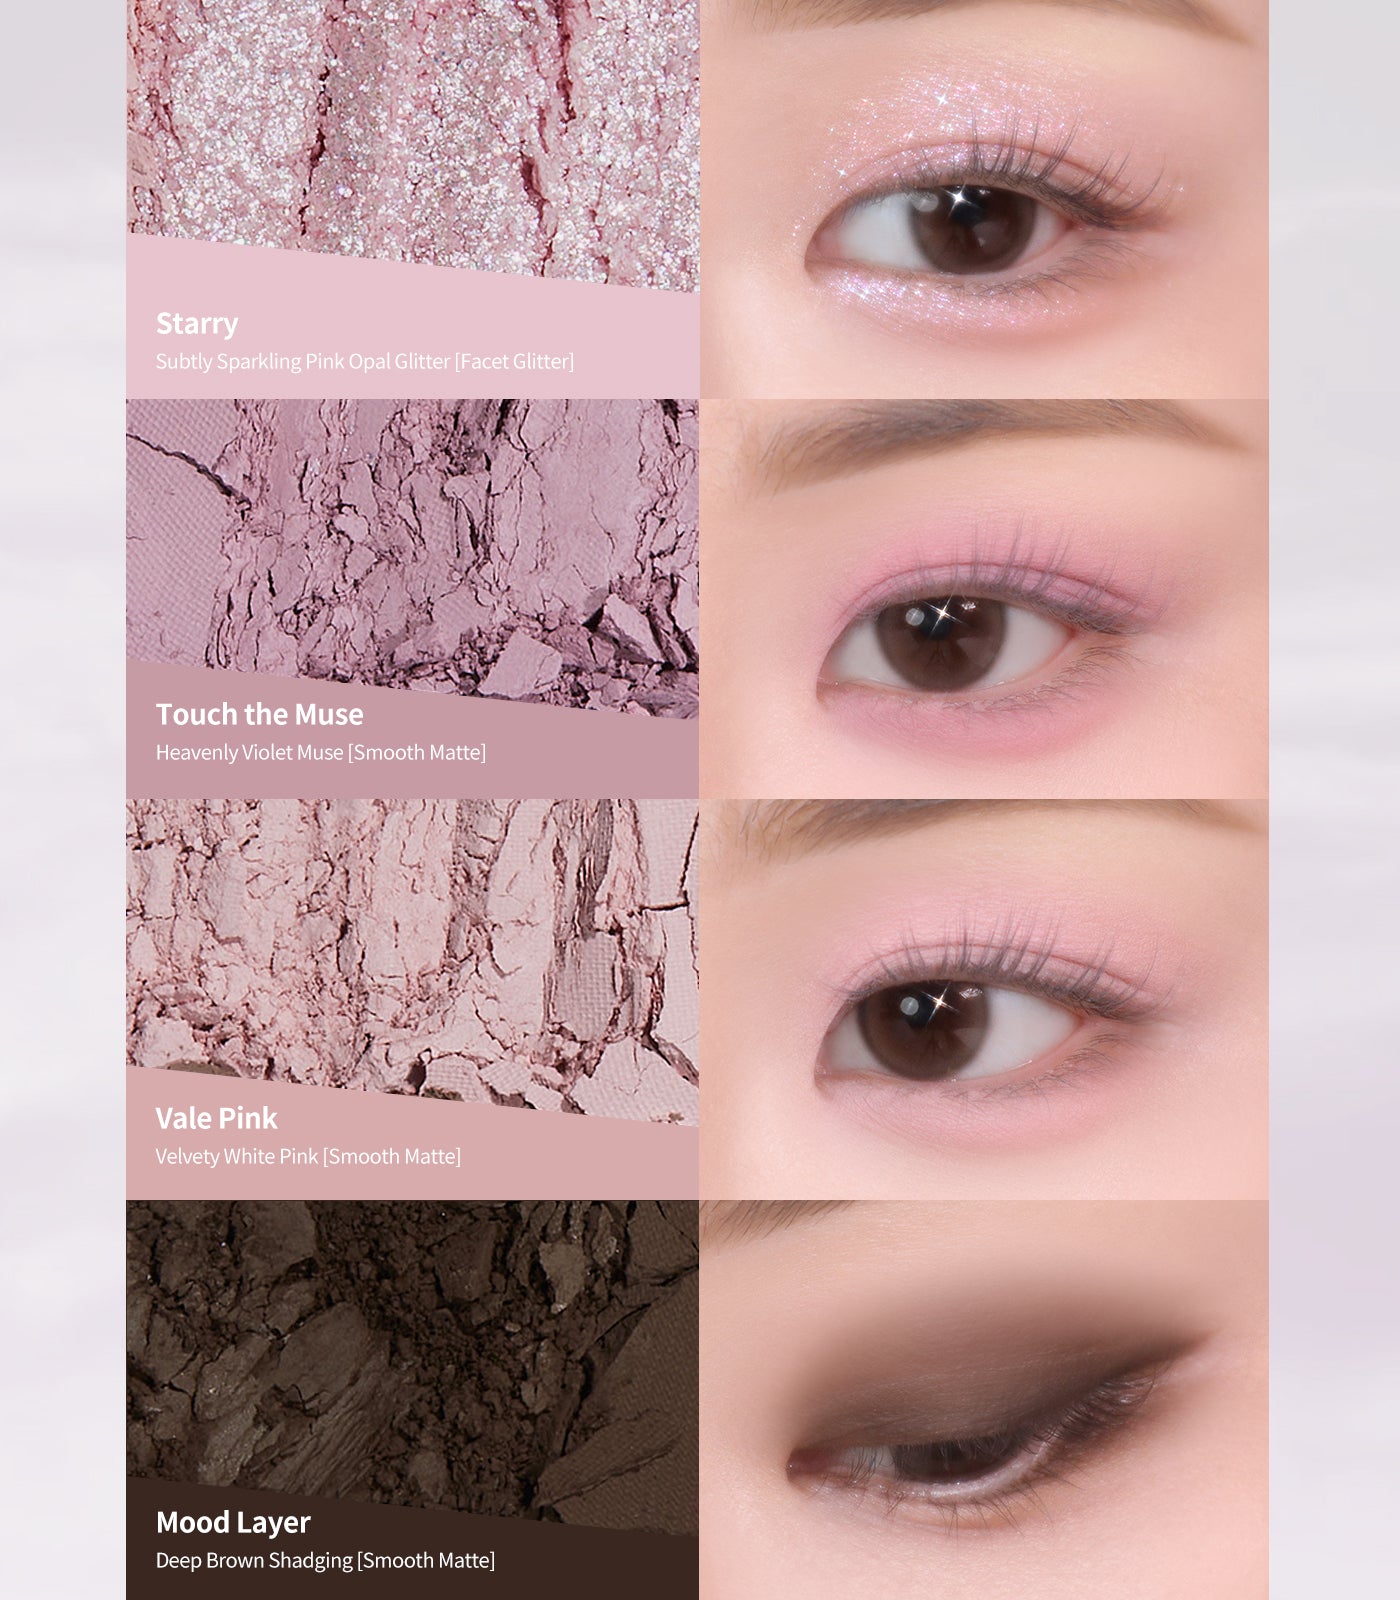 Heart Percent Dote On Mood Eye Palette, 07 Cool Muse Facets